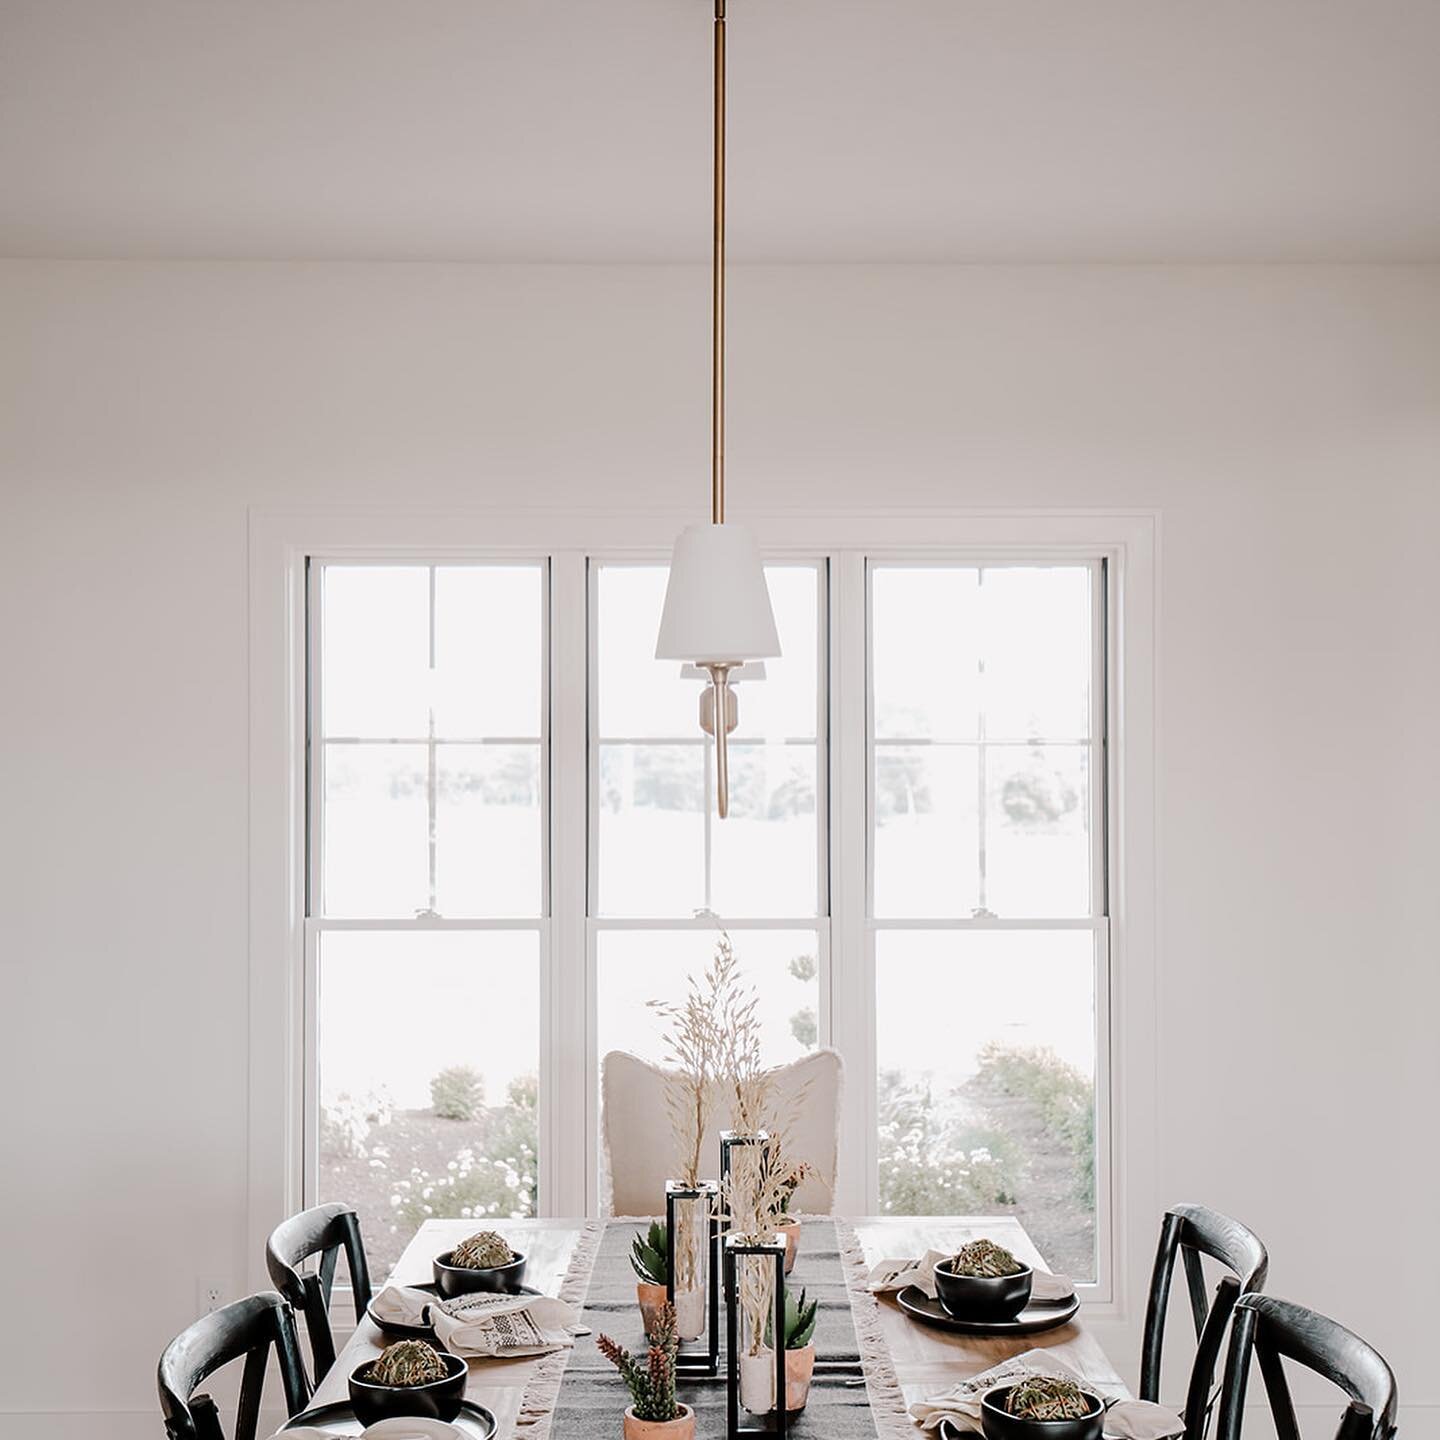 I always encourage my clients to leave their dining tables set, it gives you the opportunity to enjoy those special/seasonal place settings and your tablescapes everyday not just on special occasions!! The dining table is where so many memories are m